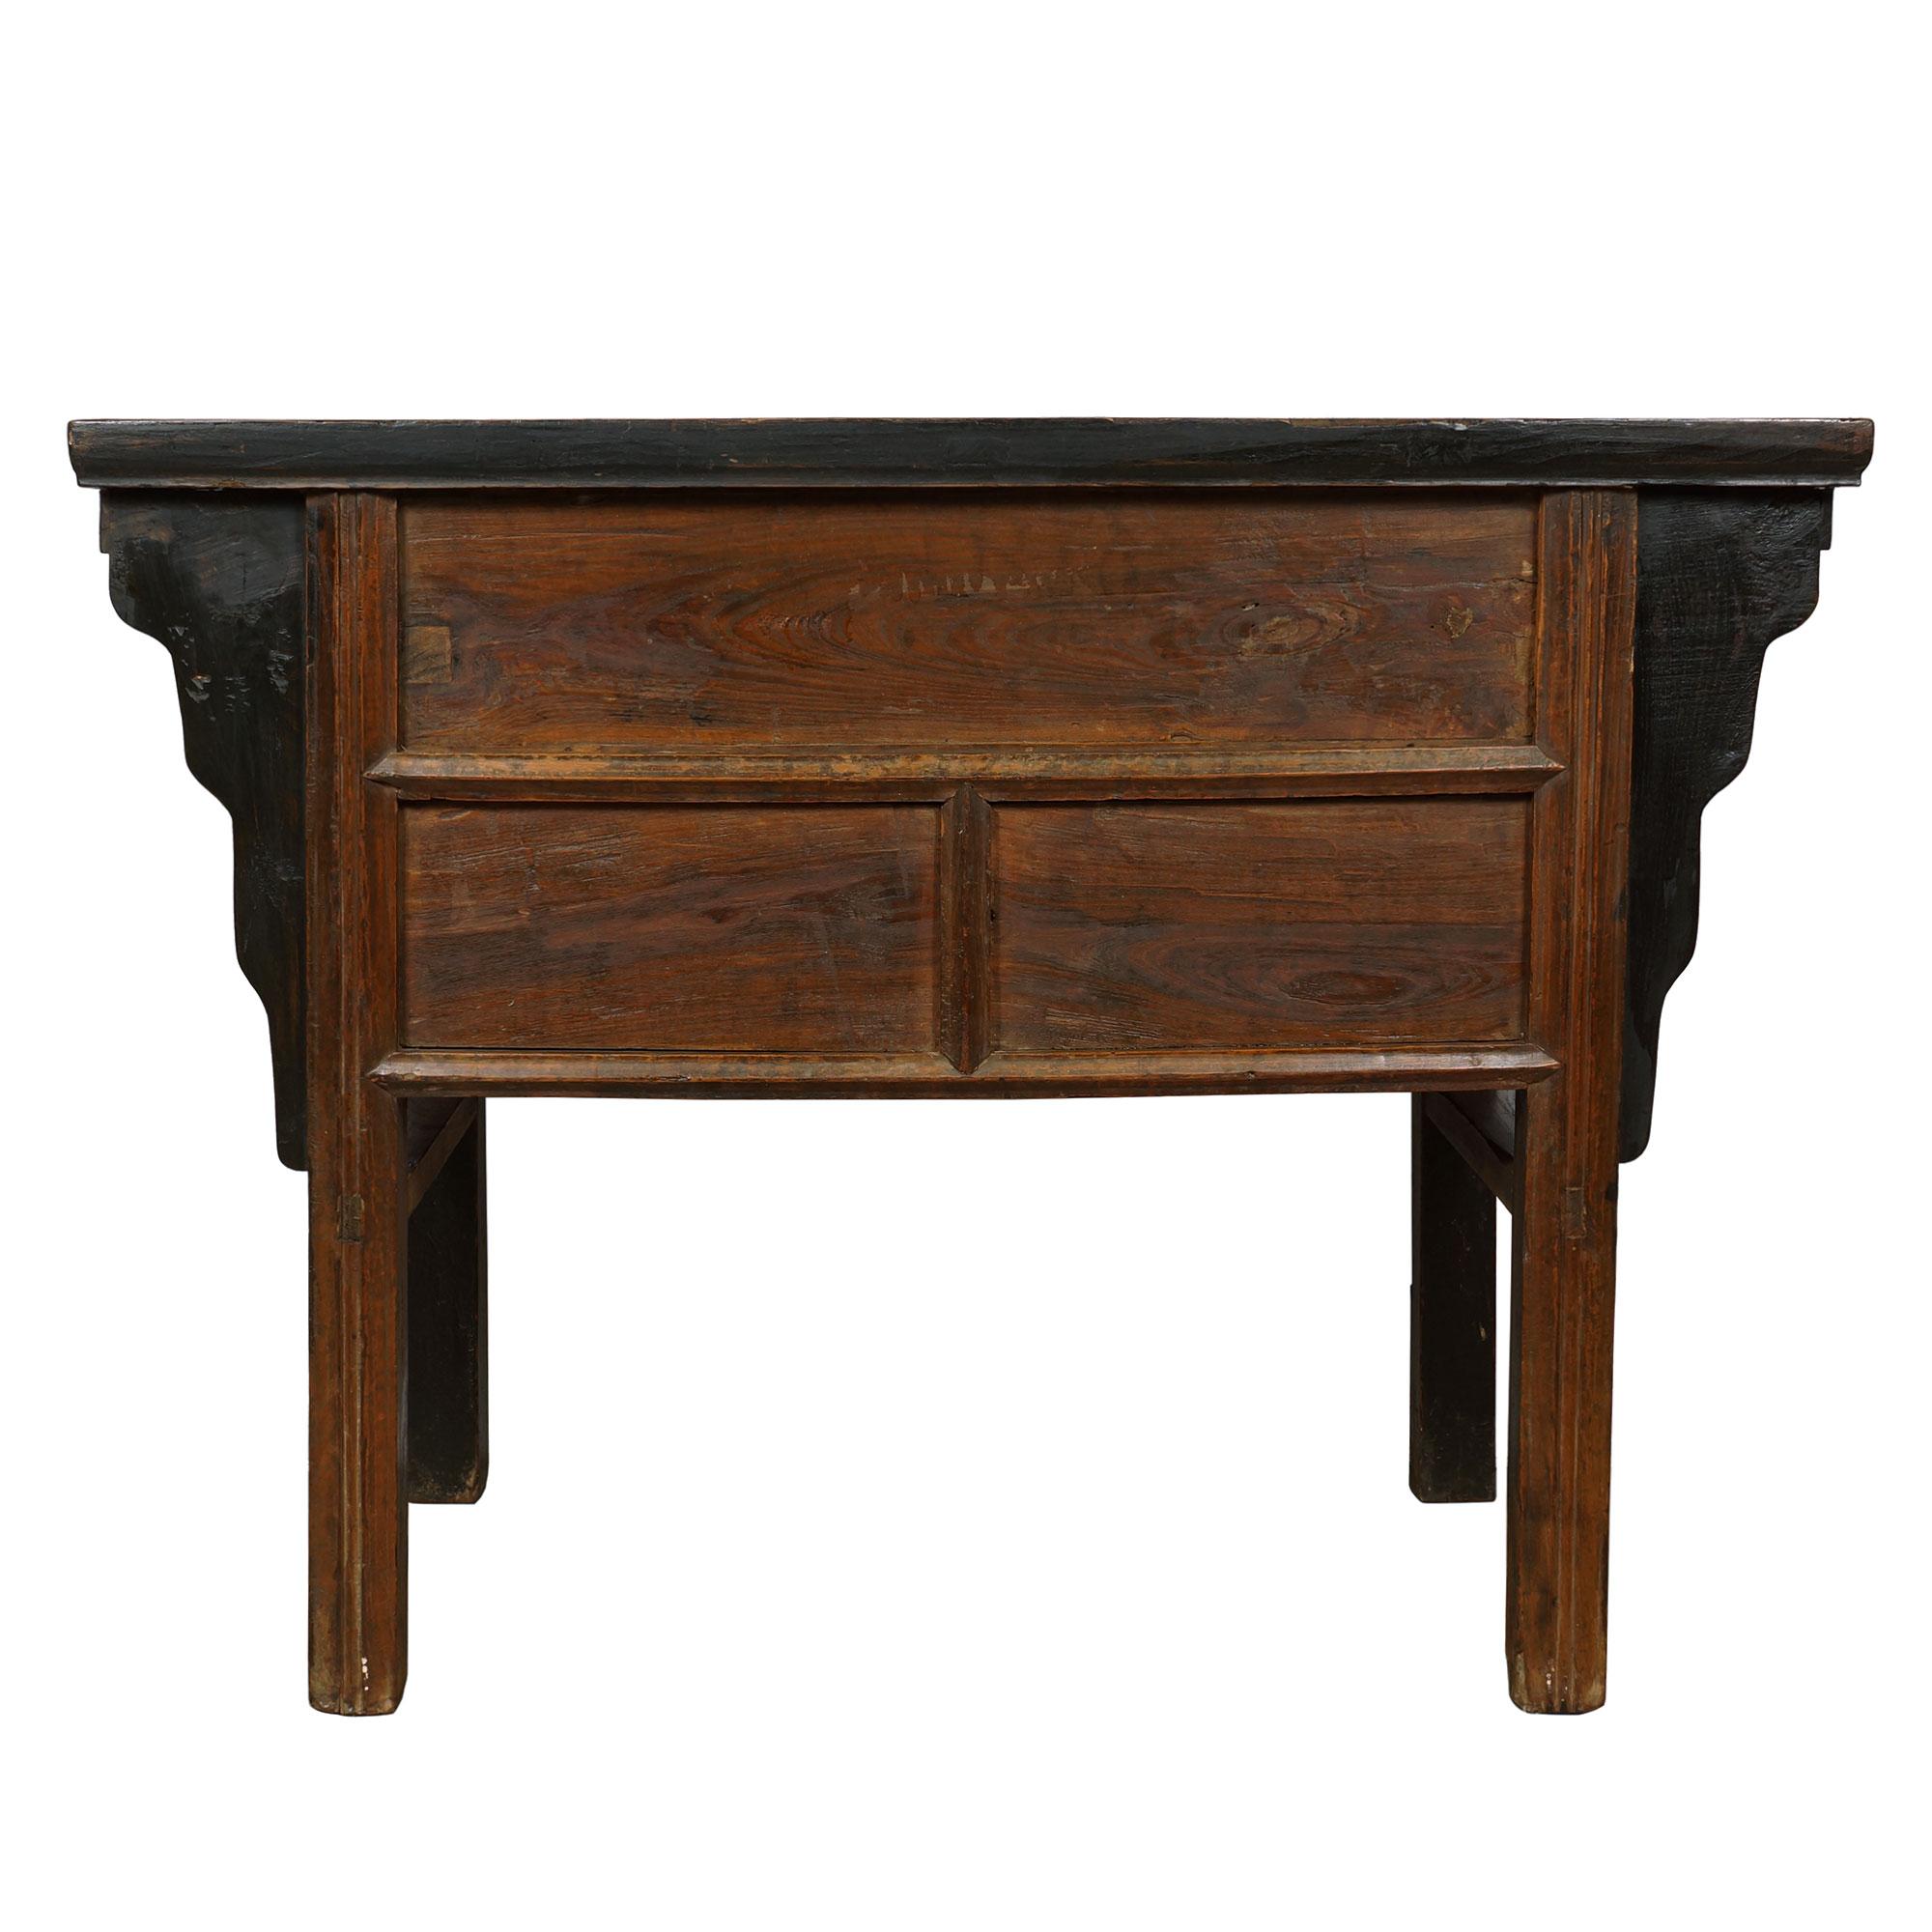 19th Century Antique Chinese Carved Shan xi Console Table/Sideboard For Sale 4